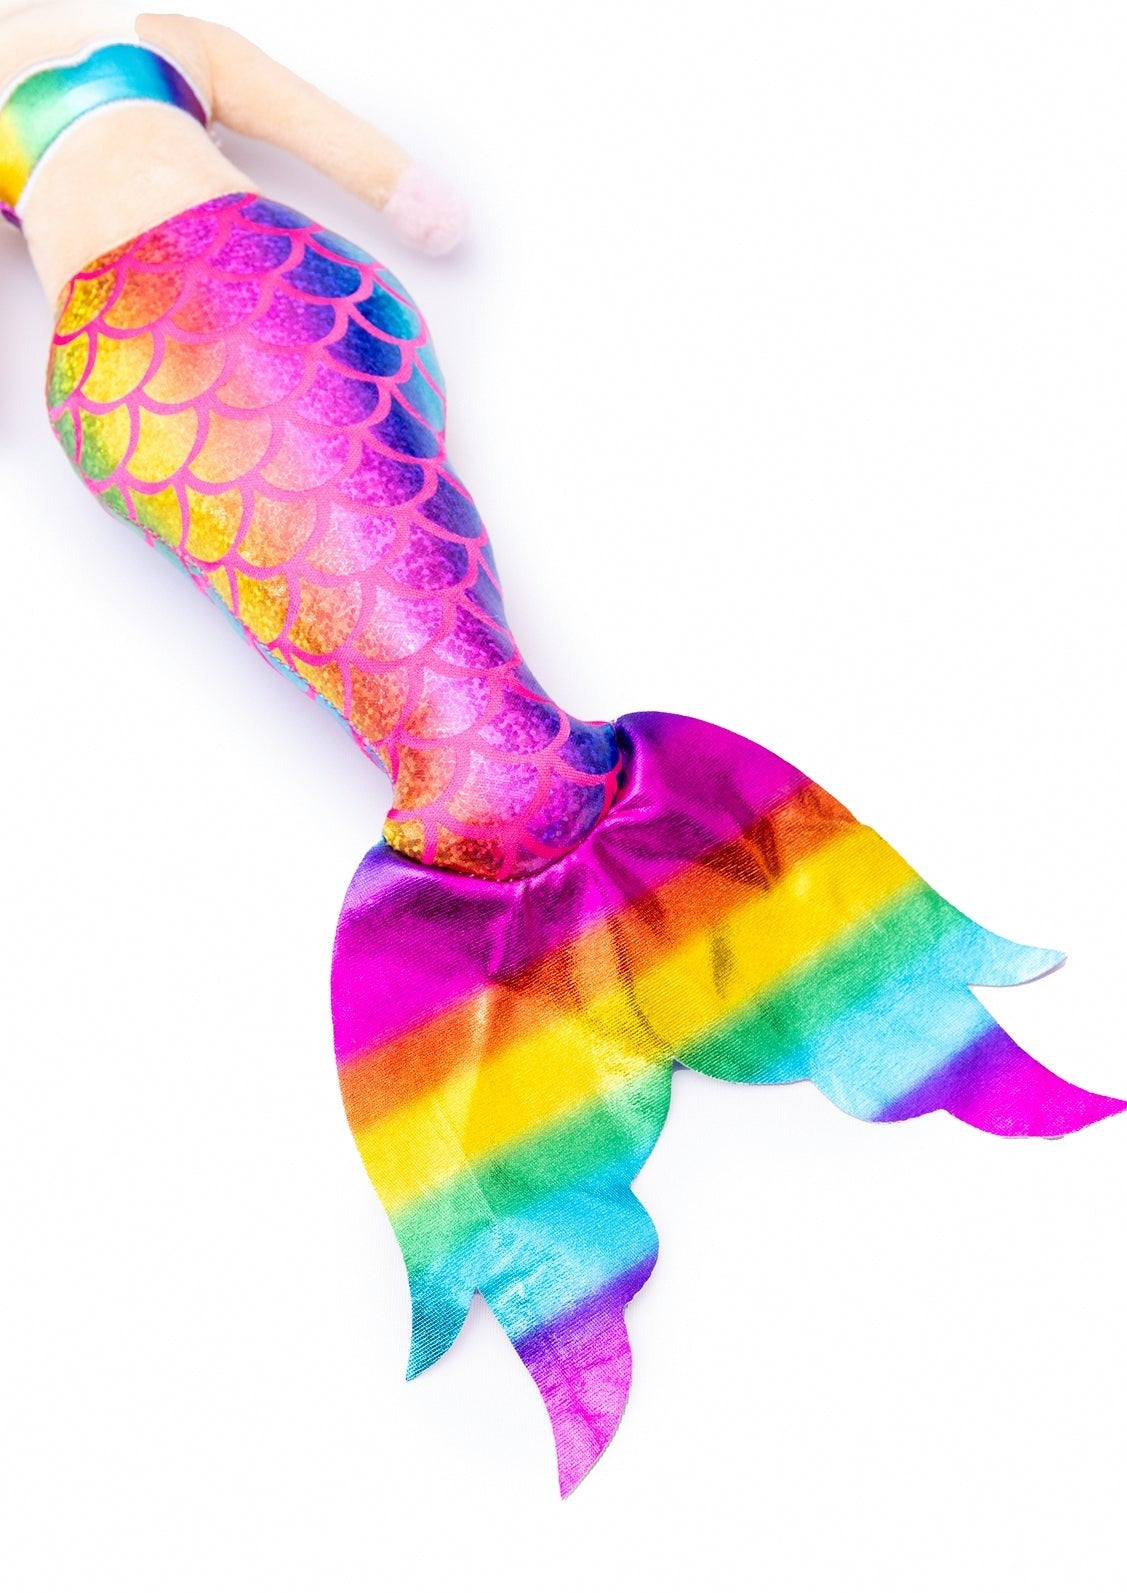 Zoë Mermaid Unicorn Doll with Iridescent Tail and Matching Top - 16 inch